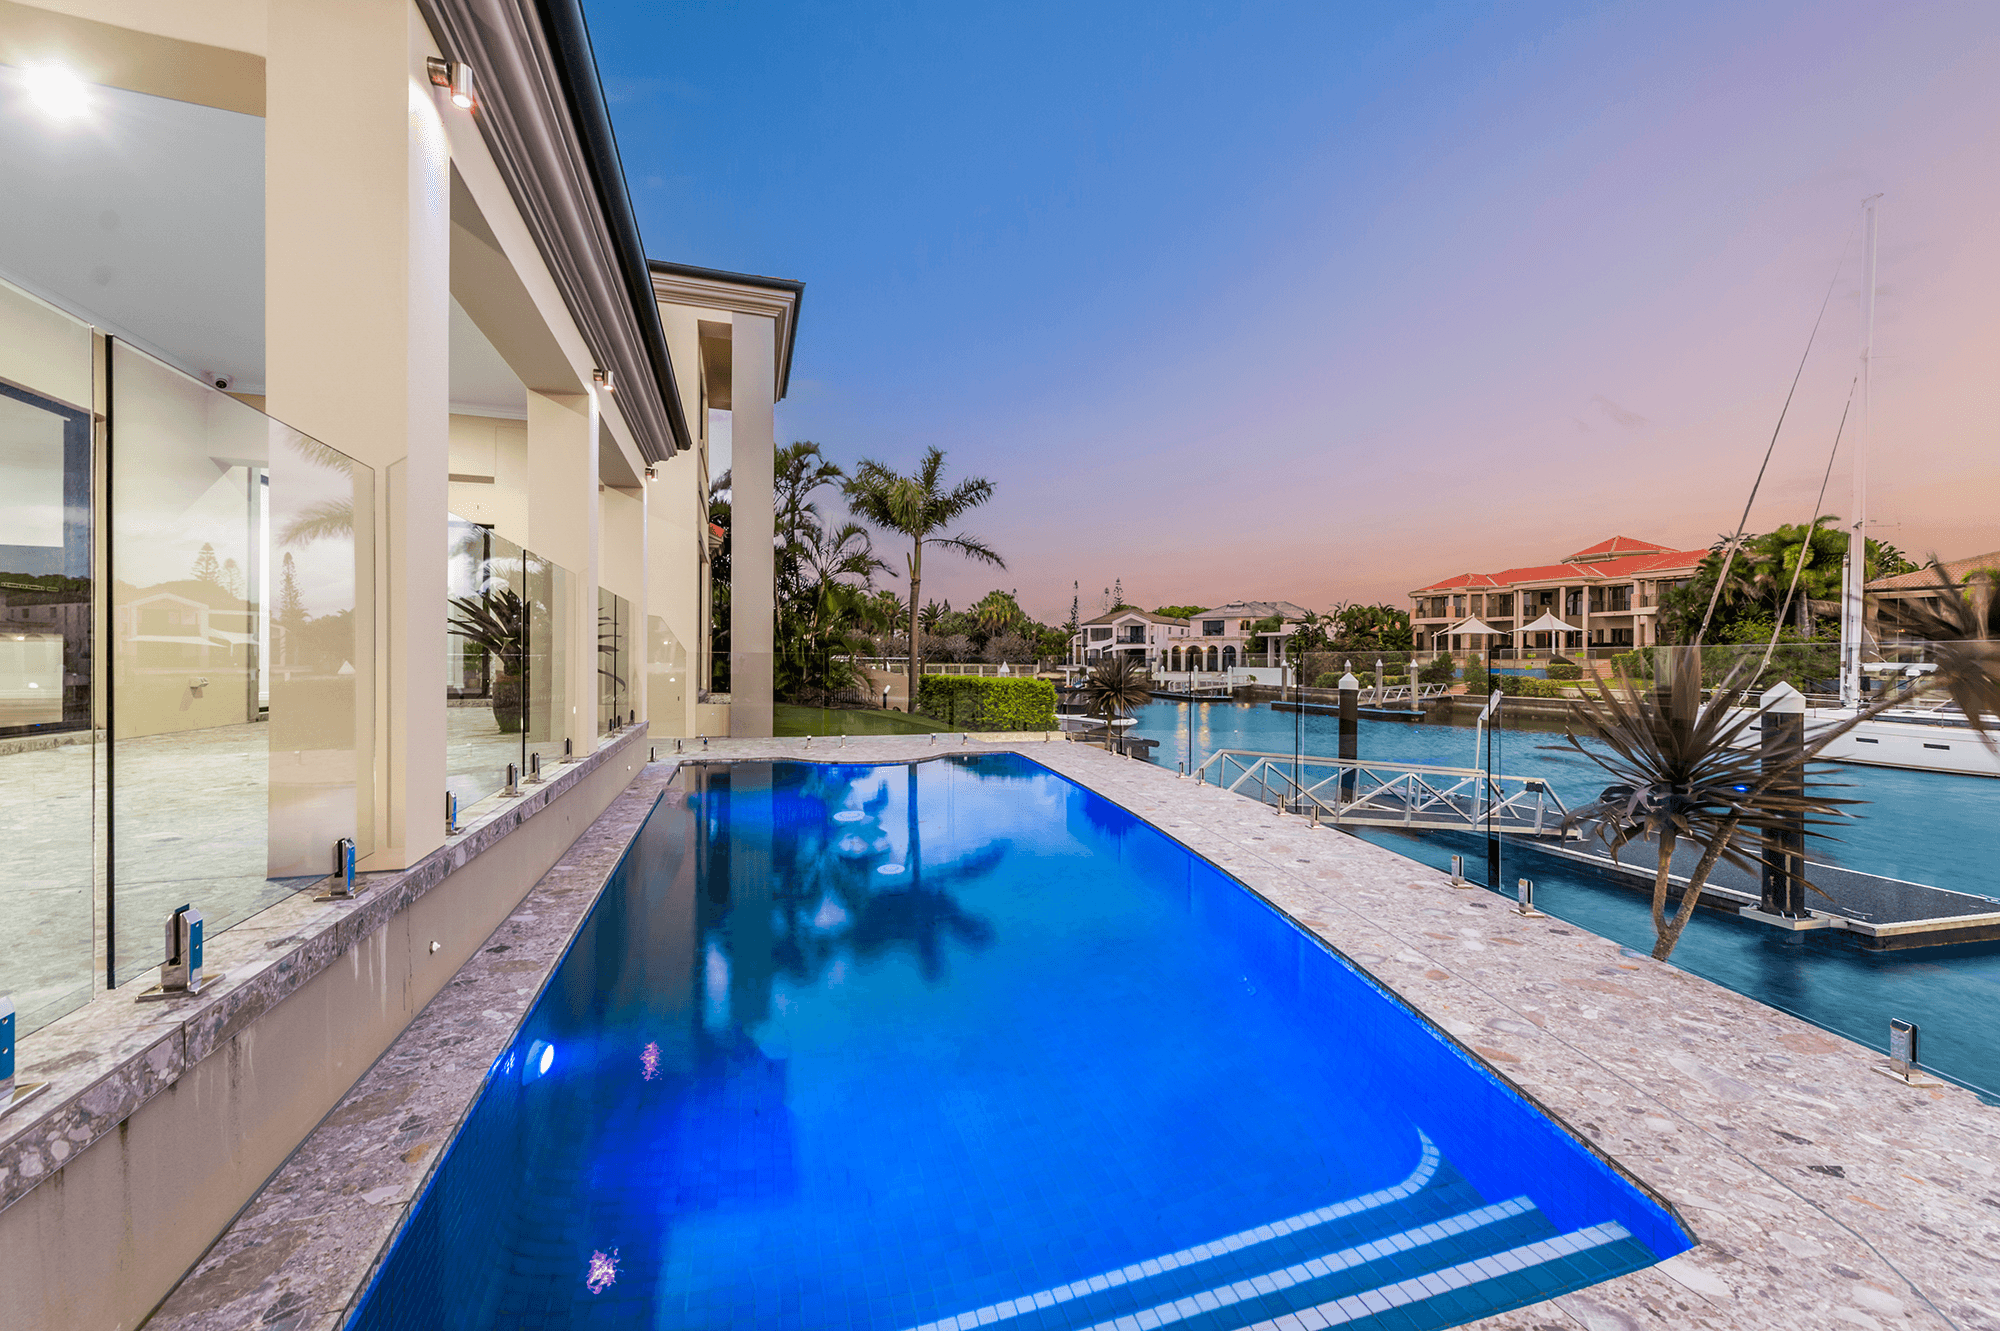 35 The Peninsula, SOVEREIGN ISLANDS, QLD 4216